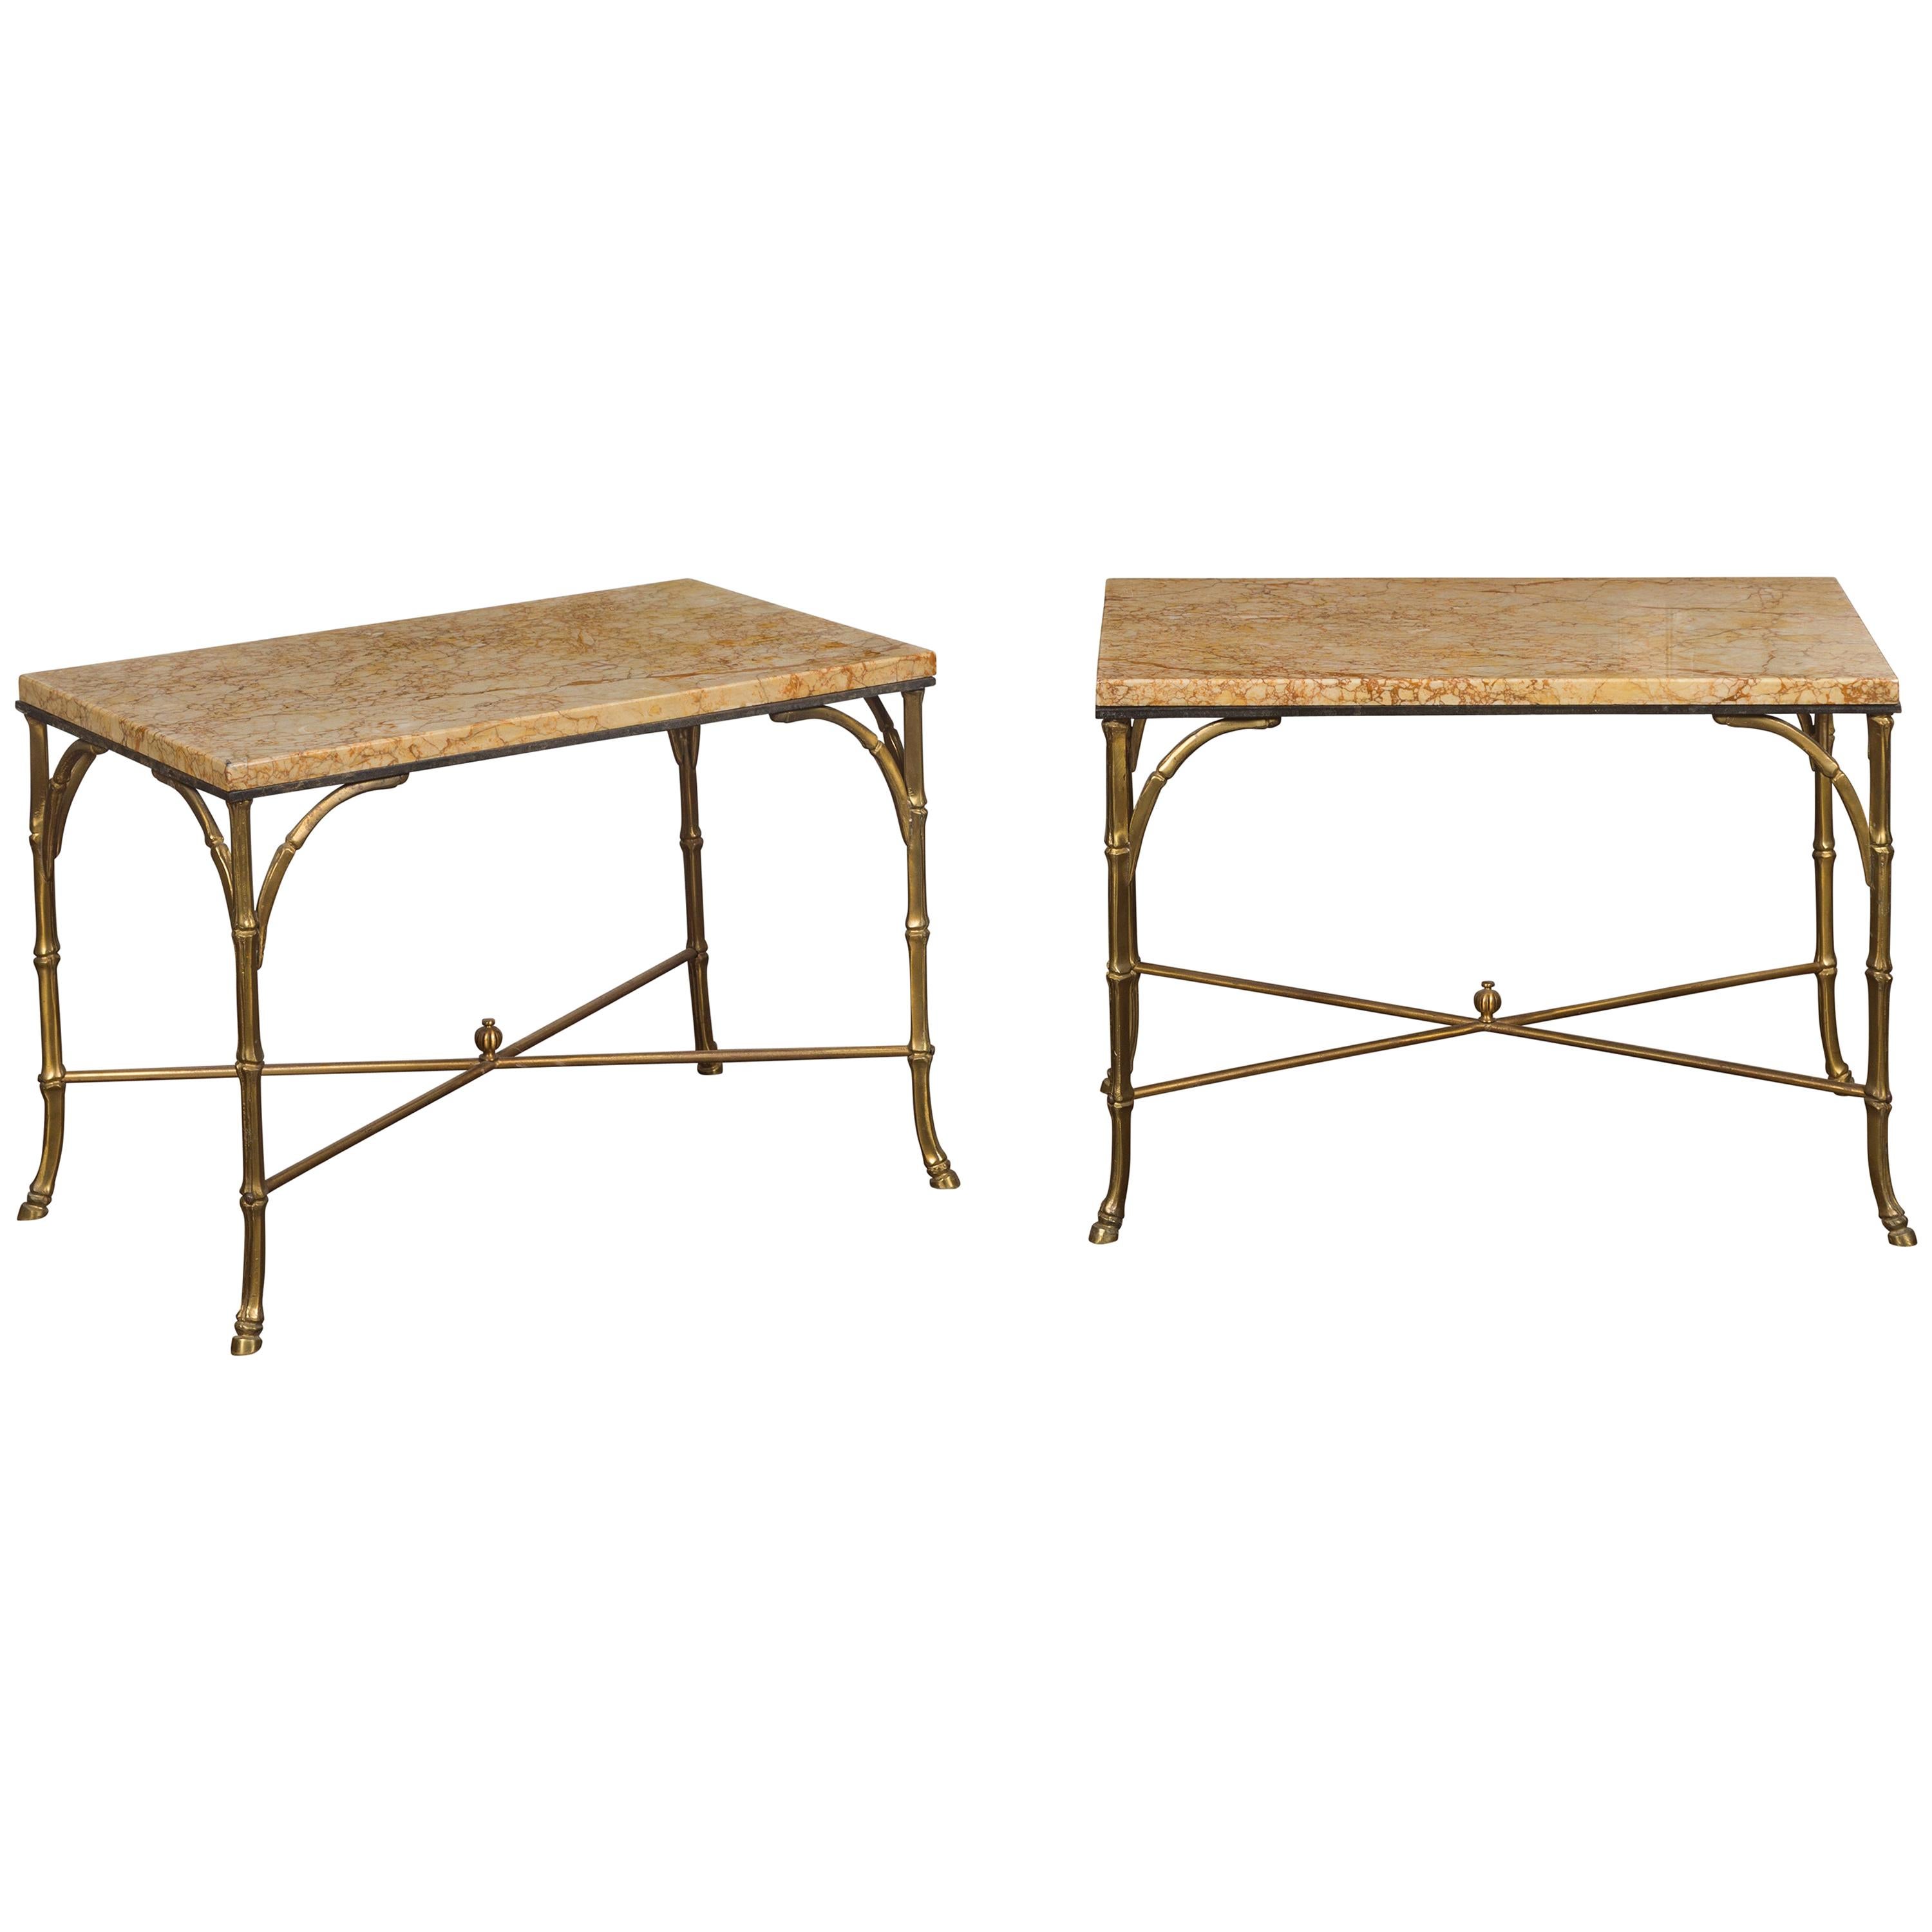 Pair of Midcentury Bronze Low Side Tables with Marble Tops and Faux-Bamboo Bases